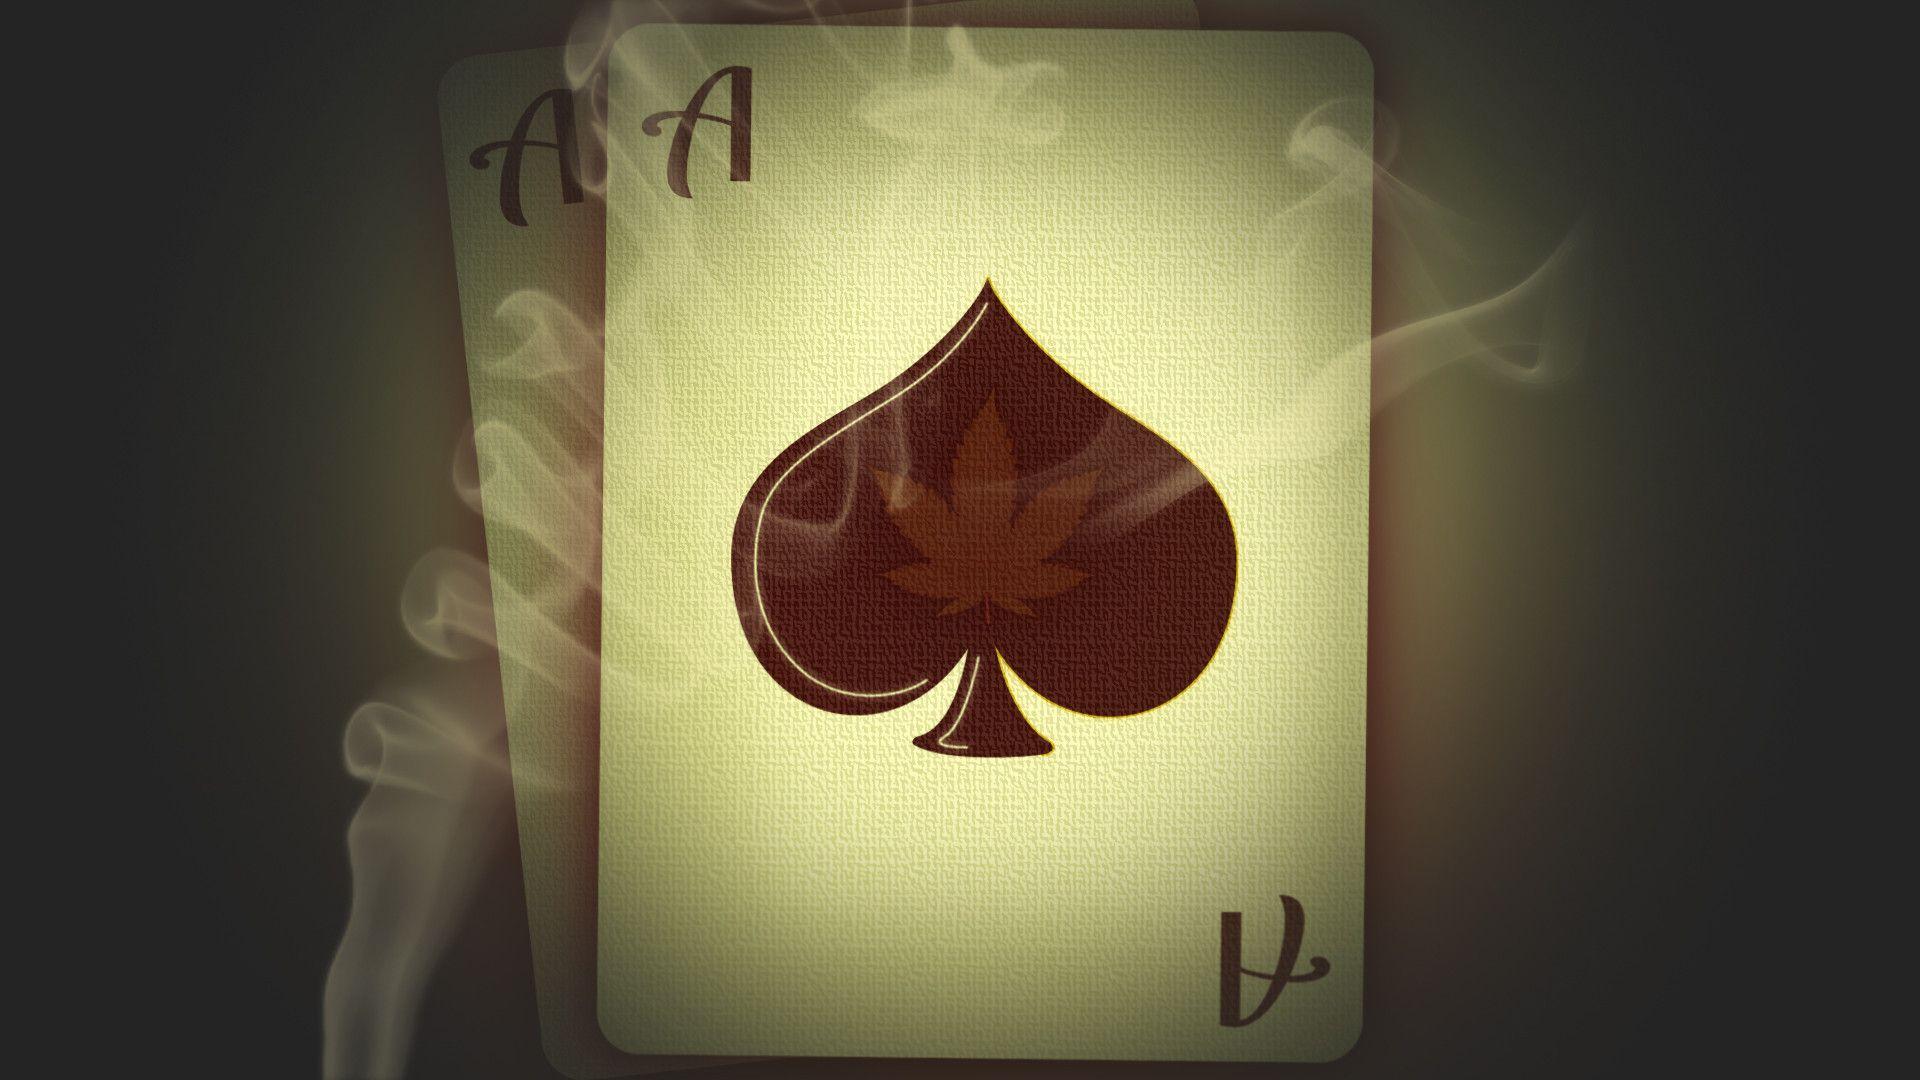 Free HD Ace of Spades Background